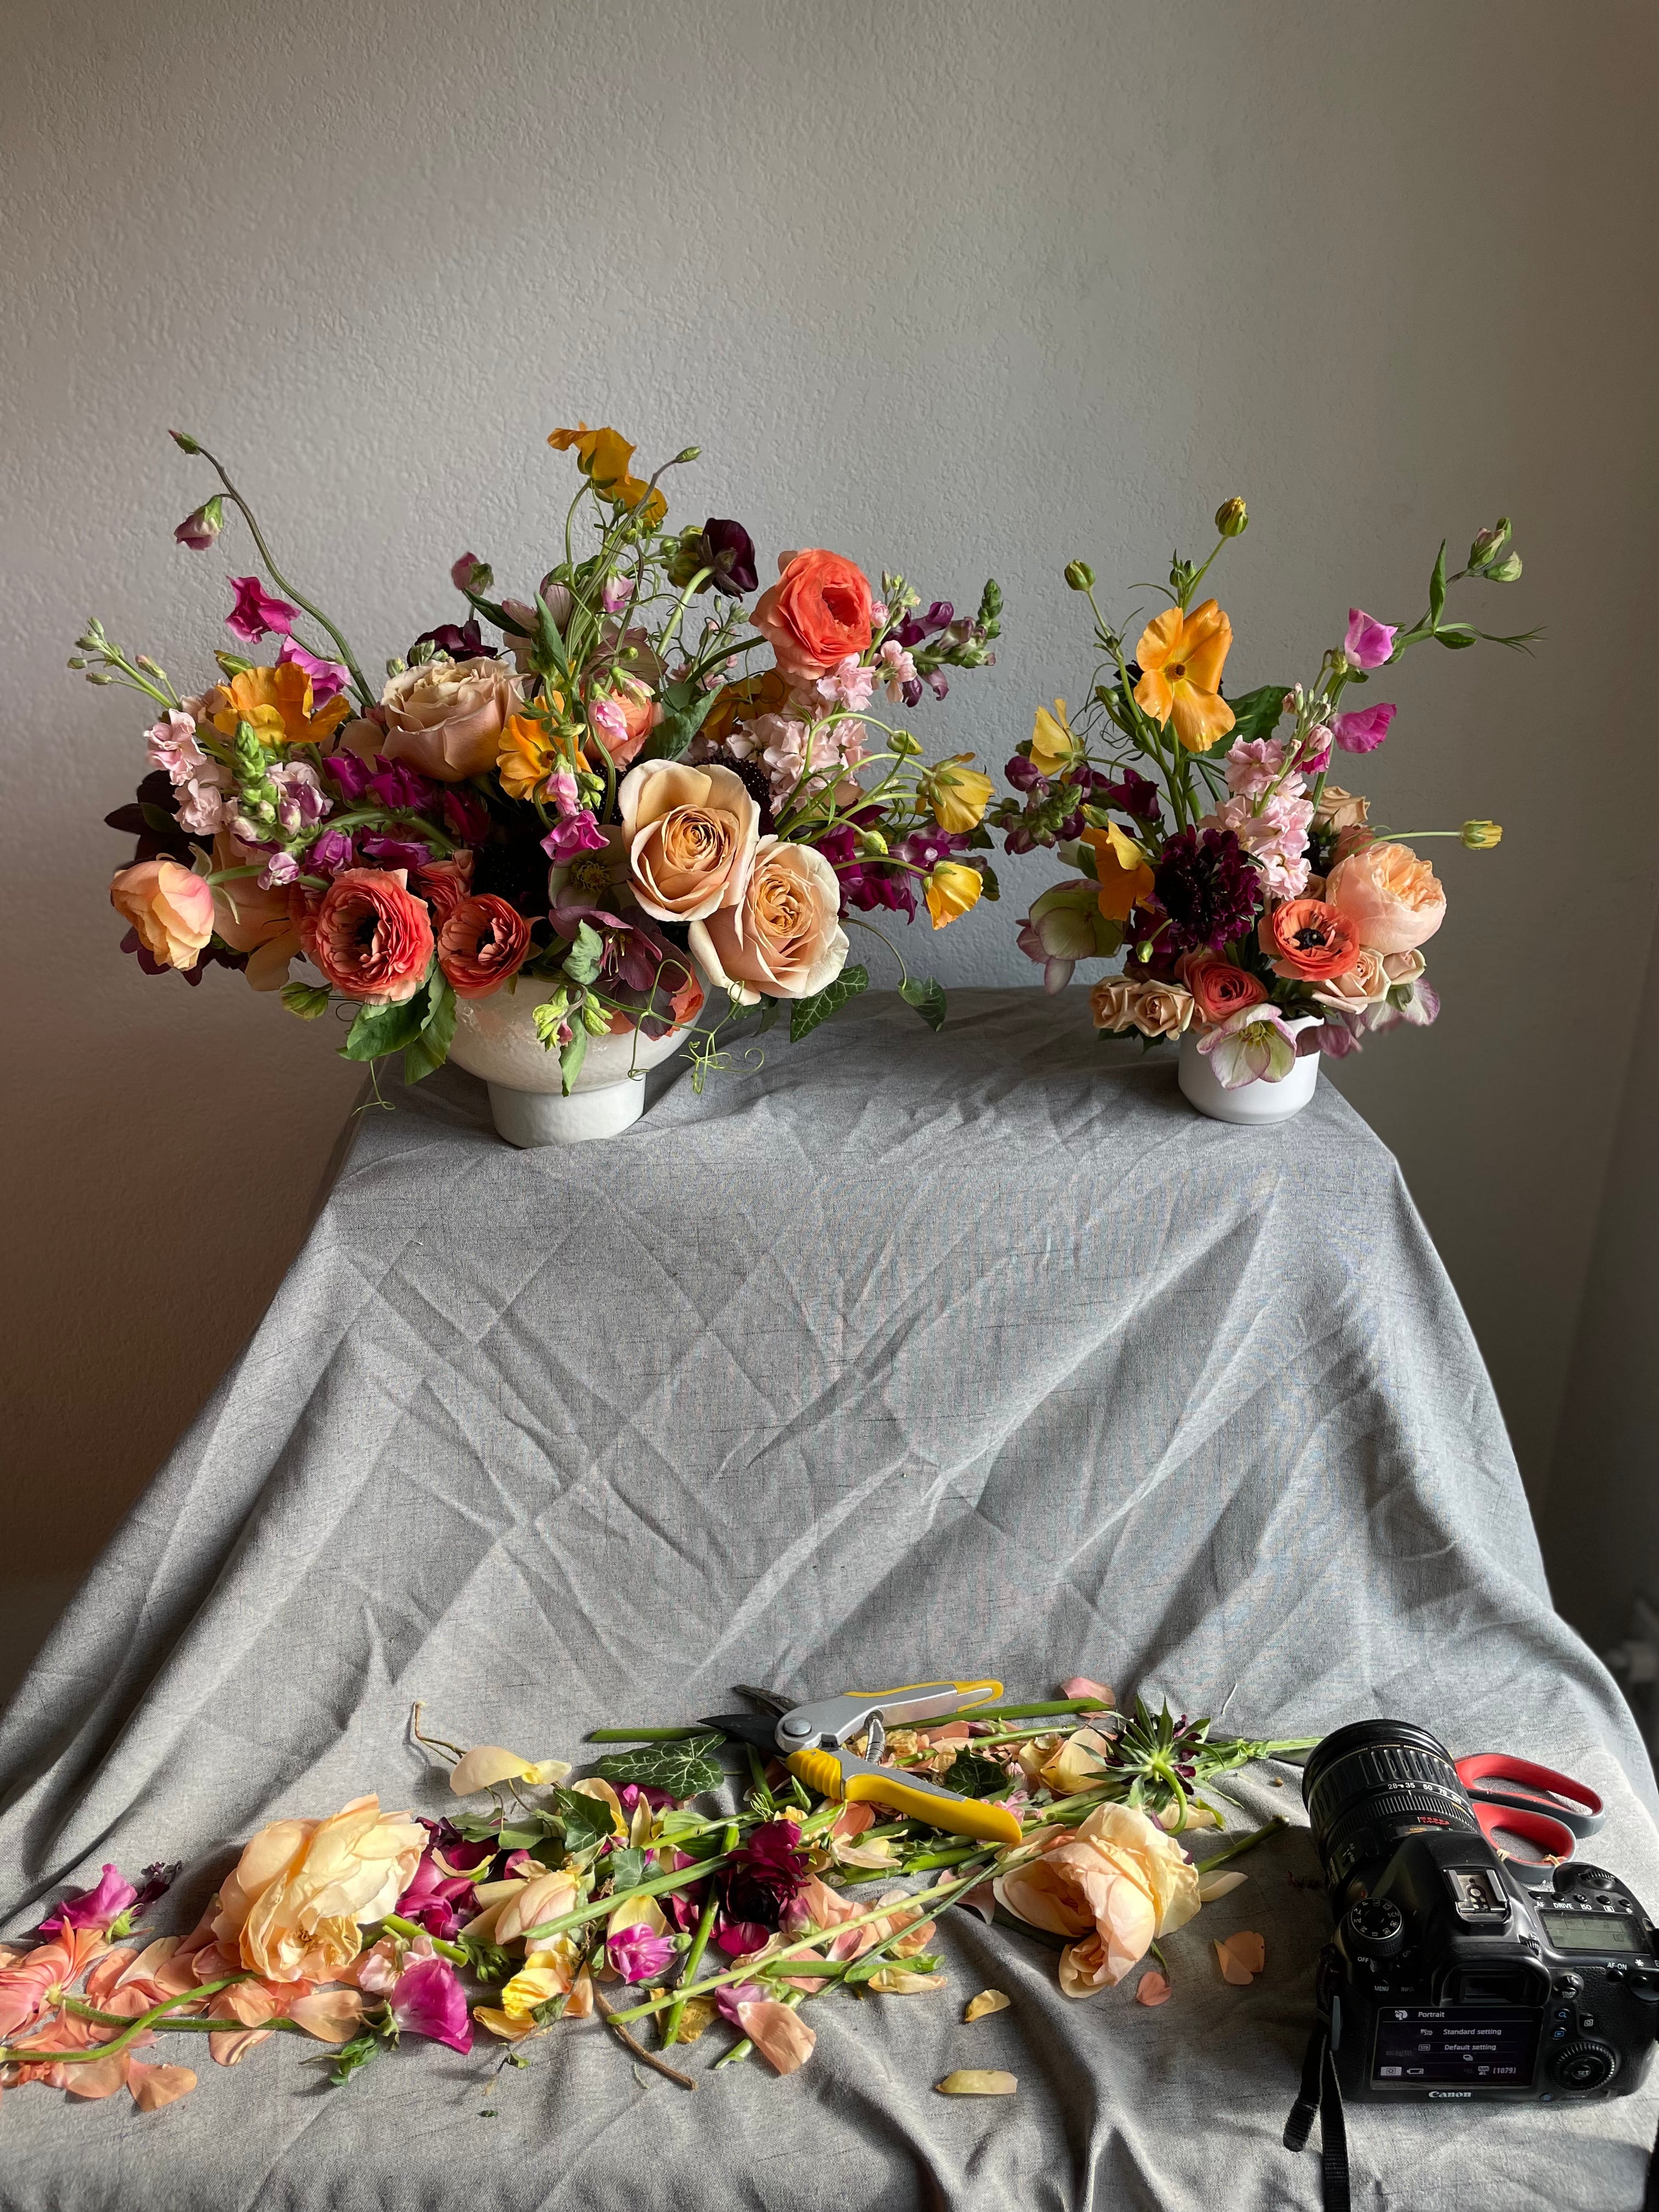 A Cheerful Table & Flowers